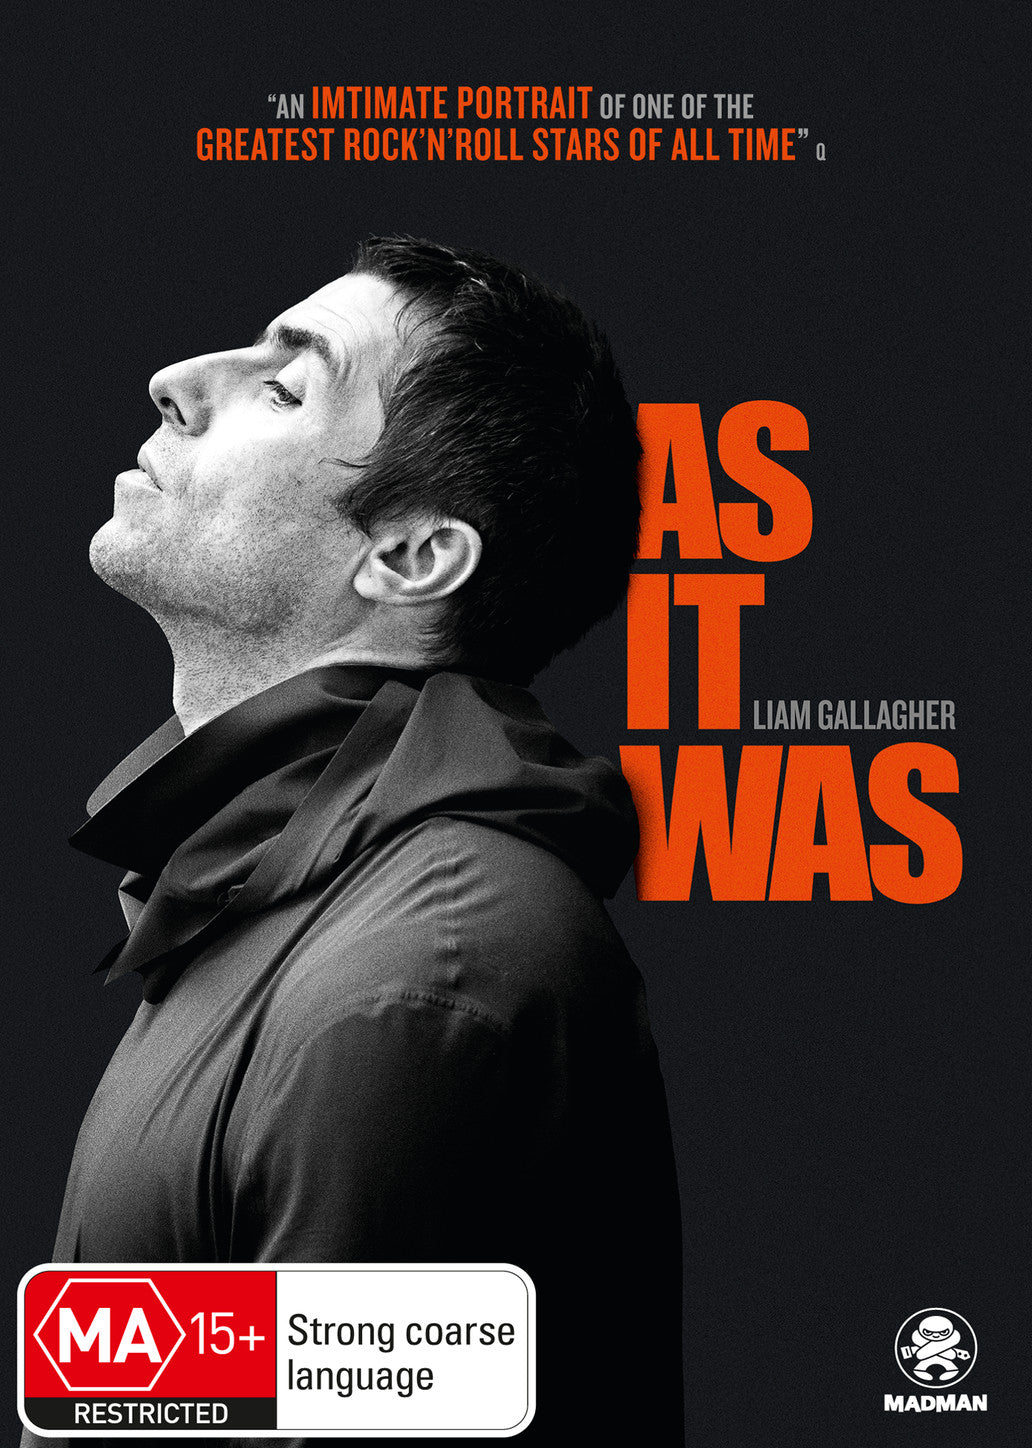 LIAM GALLAGHER: AS IT WAS